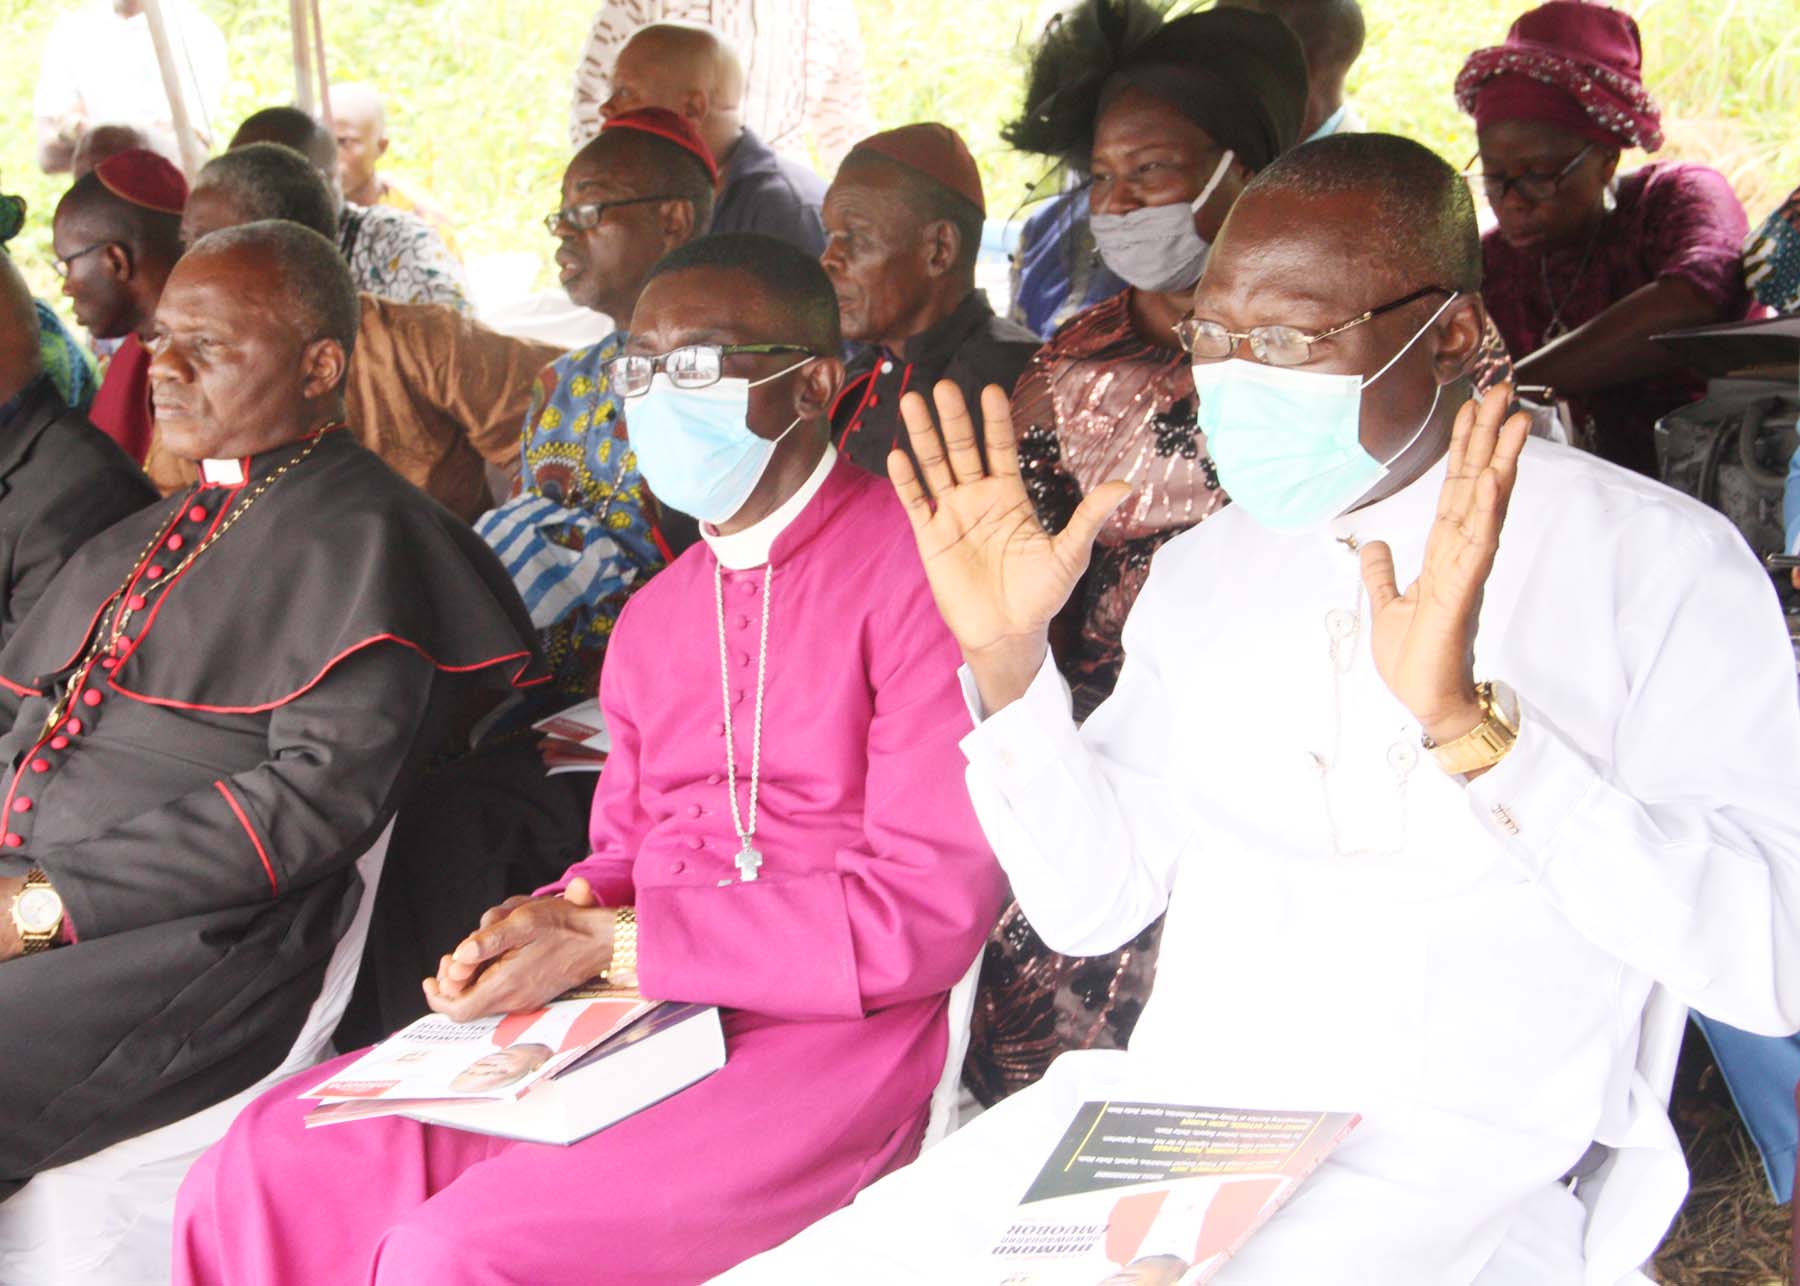   L-R, Former, Executive Secretary, Delta State Pilgrims Welfare Board Bishop Orho Iteheri, Anglican Bishop Warri Diocese, Bishop Christian Edeh and Representative, Delta State Governor Apostle Silvanus Okorotie during the Final Burial of the Late Bishop Diamond Emuobor in Ugborhen, Sapele Delta State at the weekend